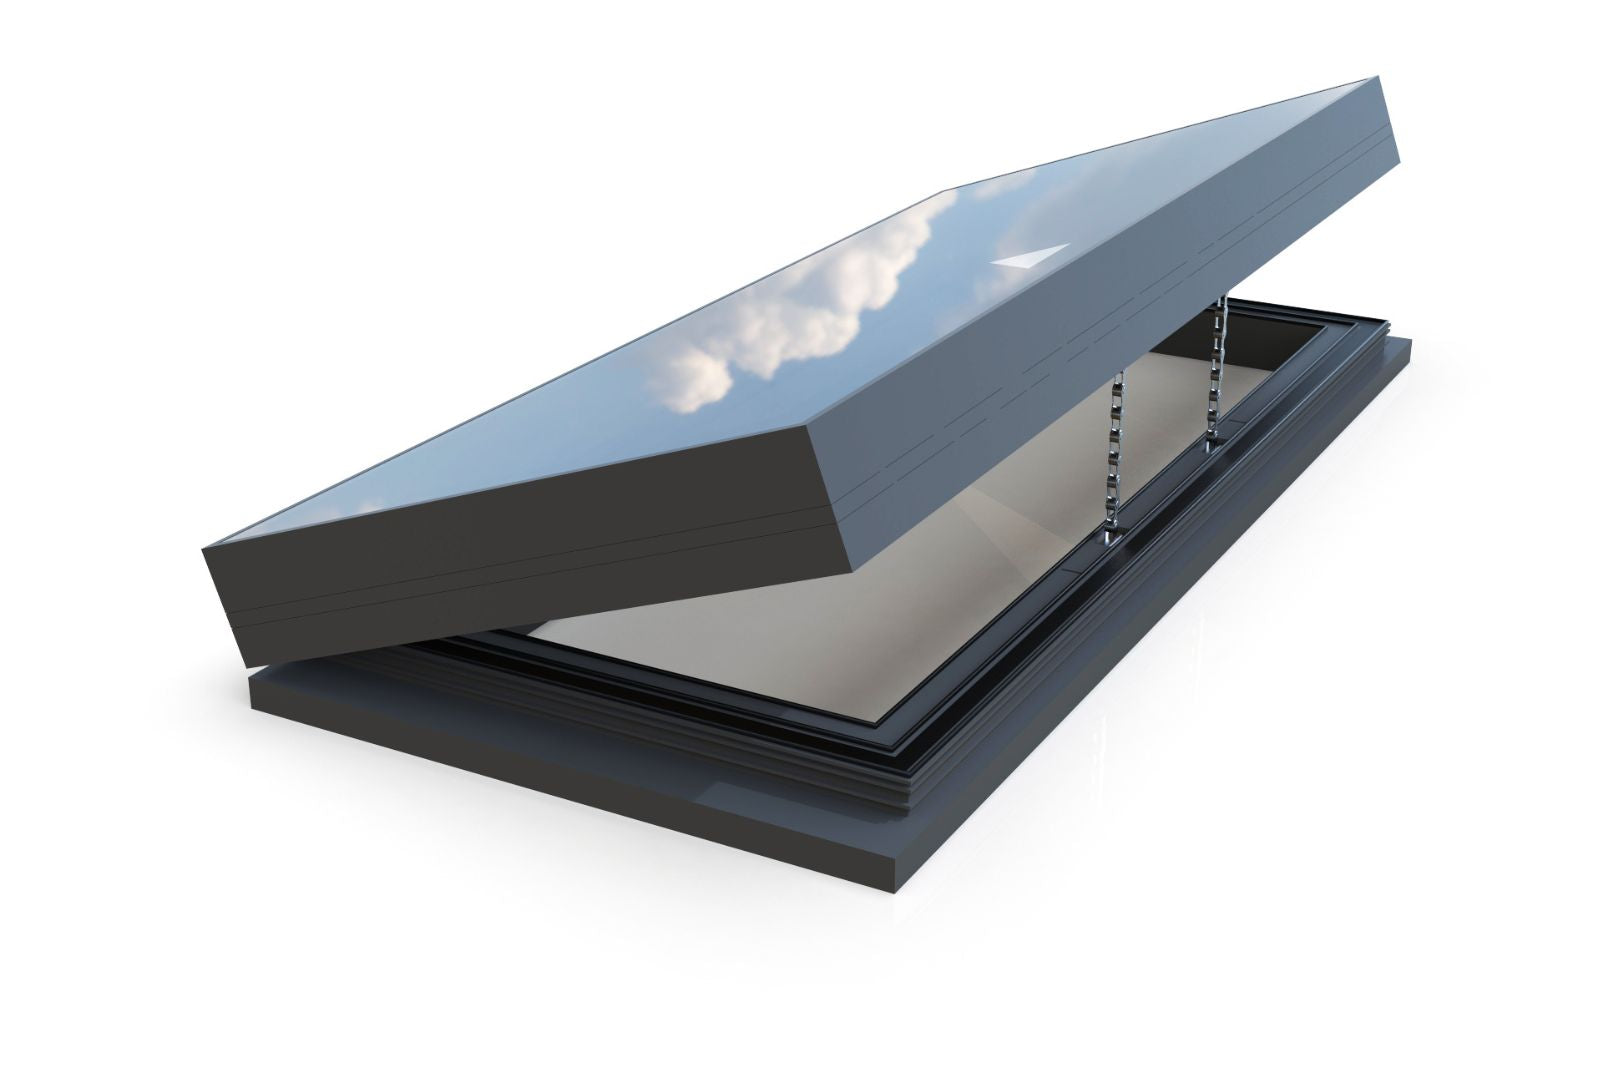 Electric Opening Skylight 1000 x 1500mm